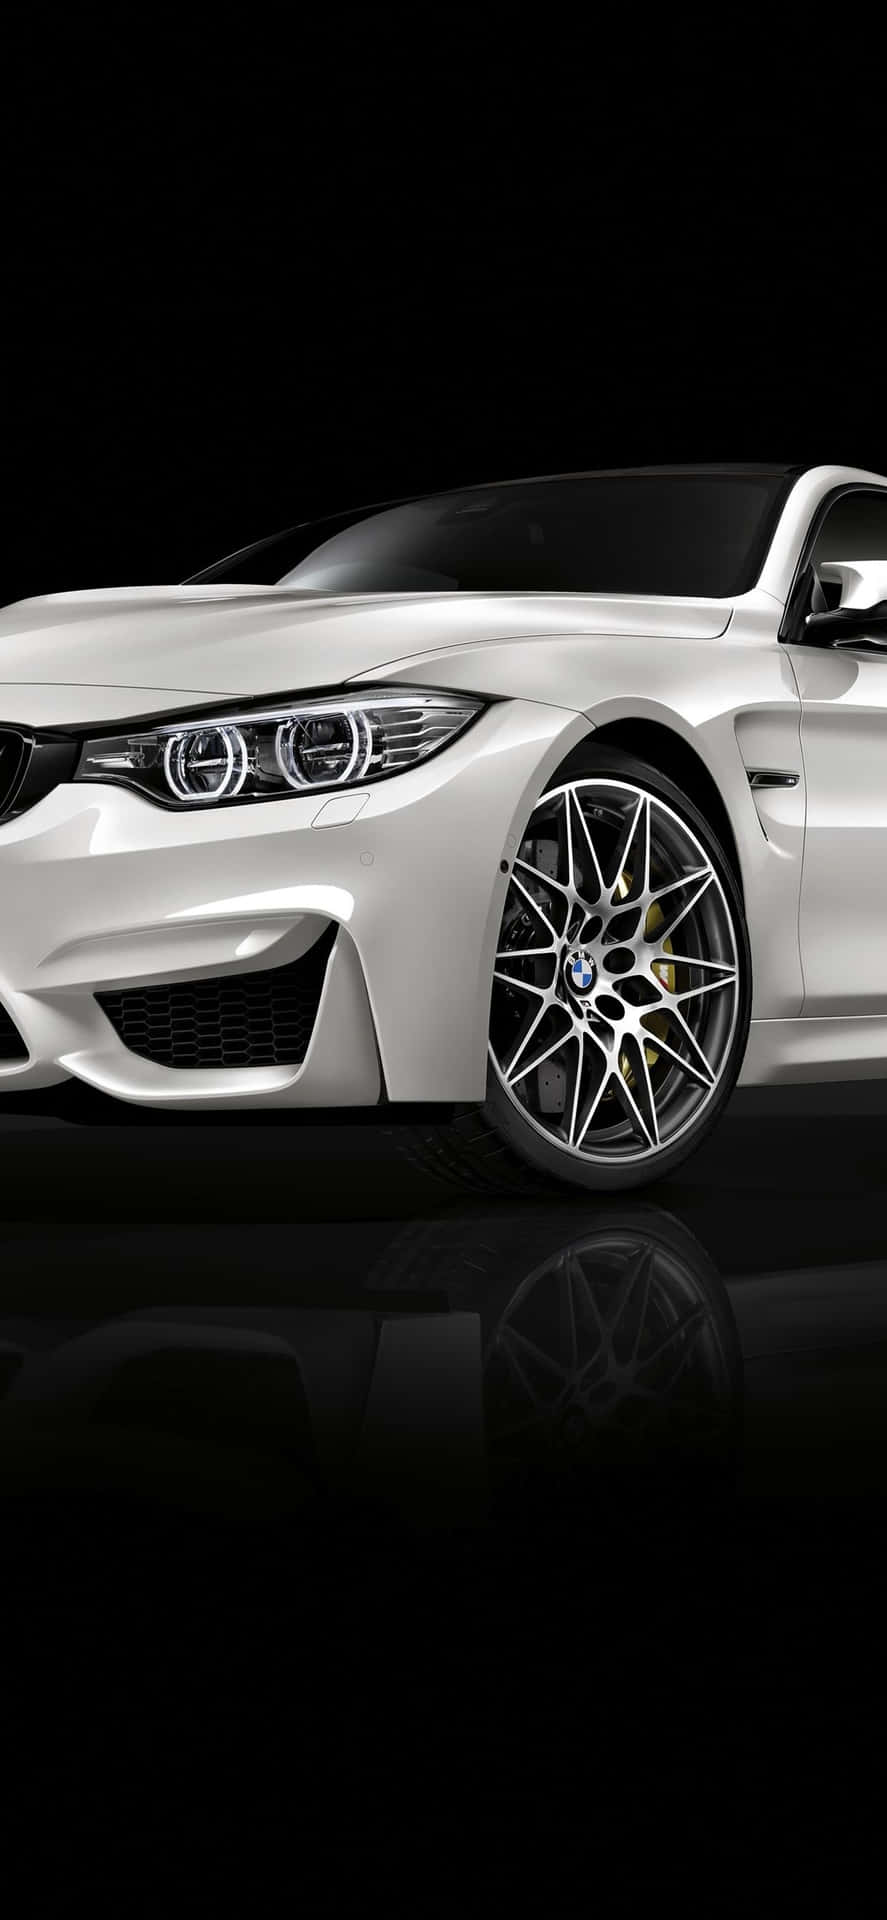 Get The Latest Bmw Model Now Installed On Your Iphone Background